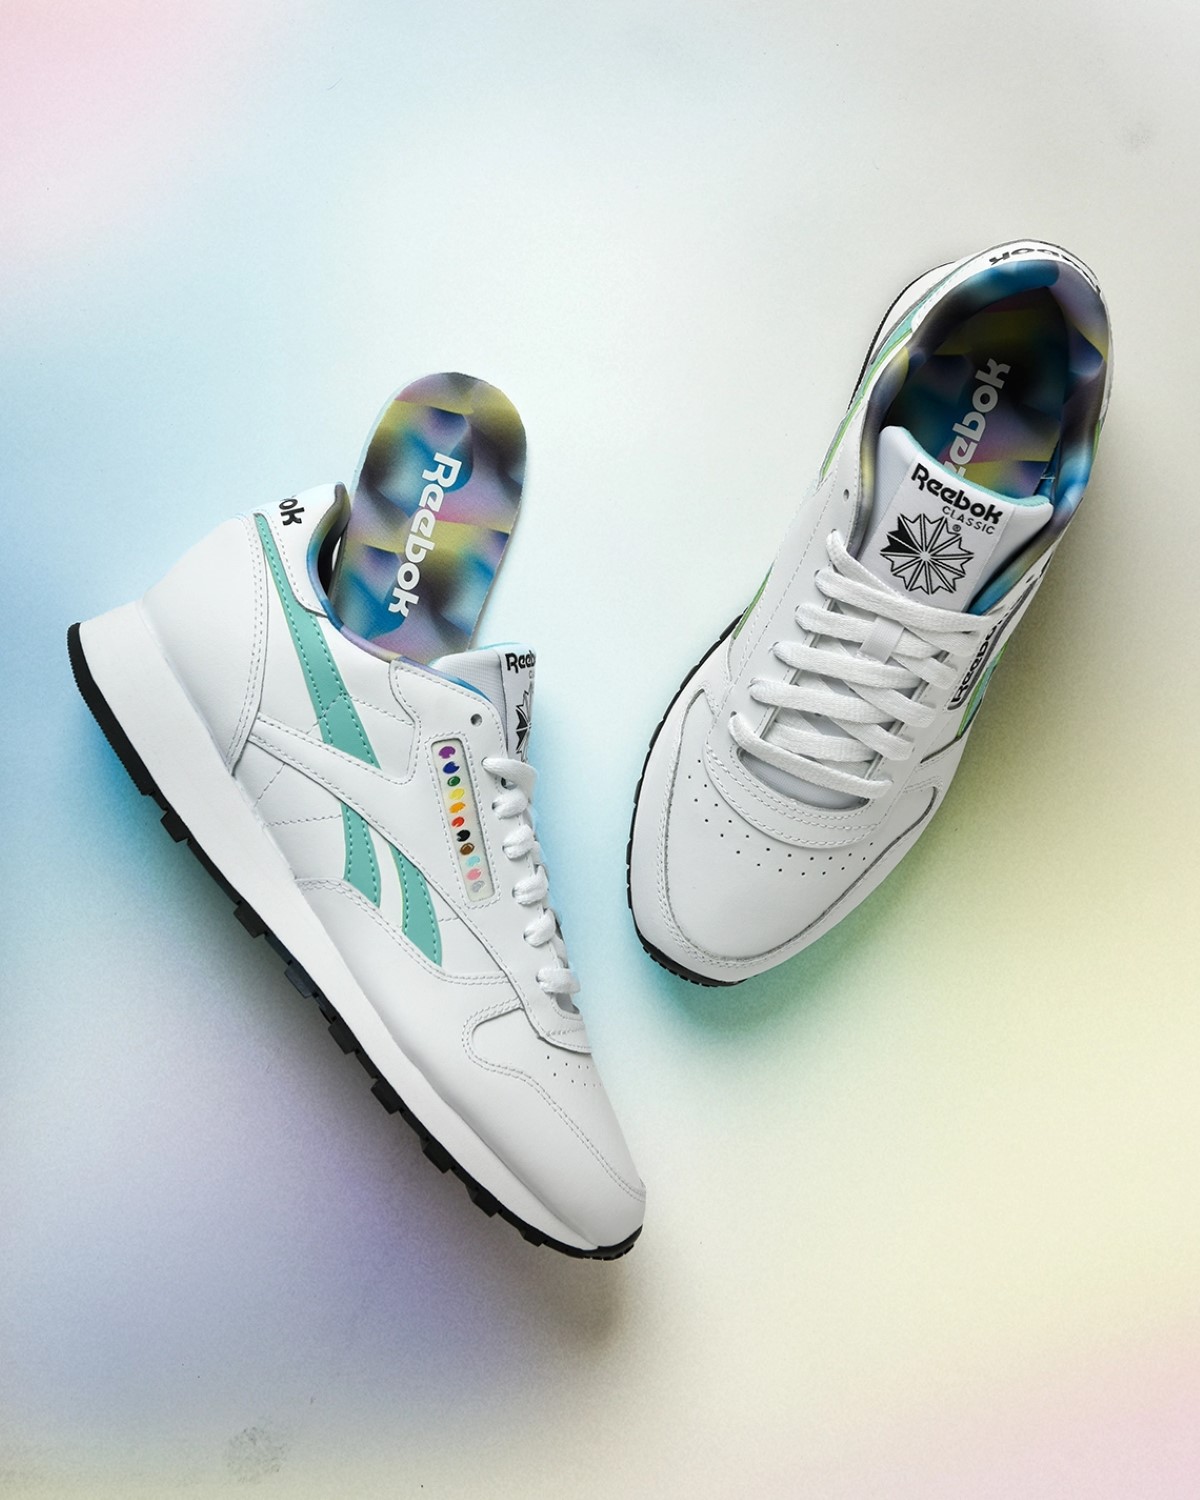 Reebok's inclusive unisex collection for Pride month